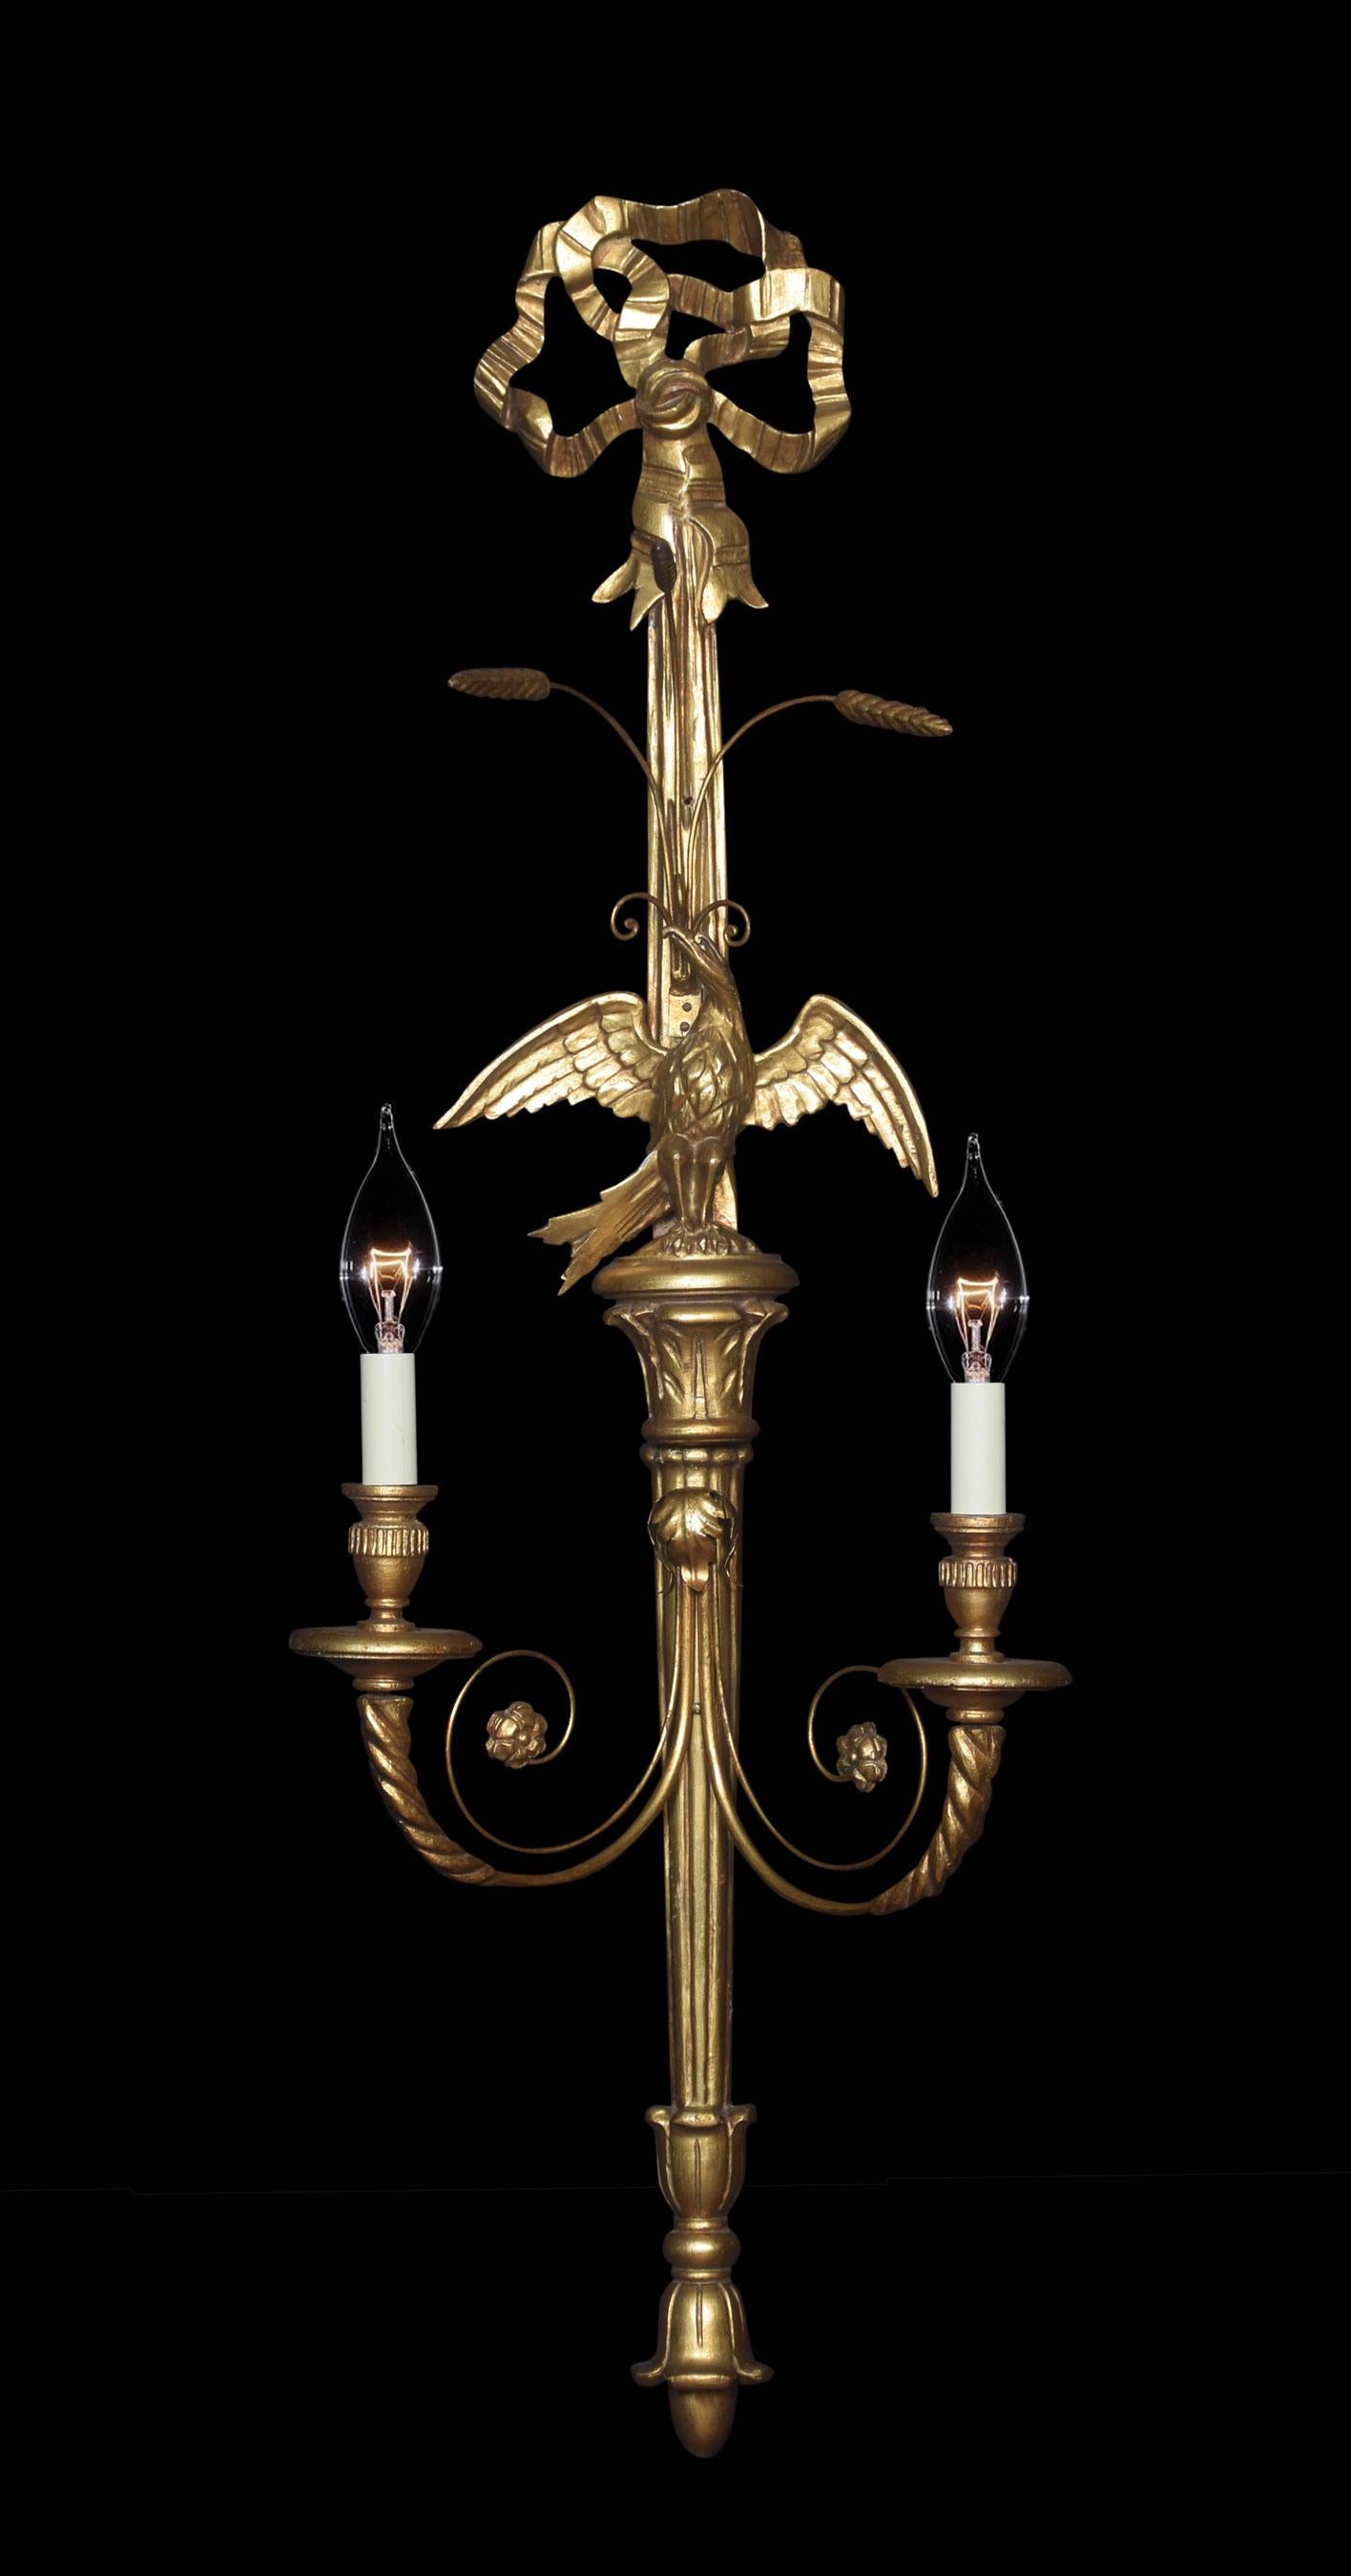 Pair of carved and gilded wall lights, each with central eagle flanked by a pair of scrolling branches, ribbon detail, and bow crest.

Dimensions
Height 45 Inches
Width 15 Inches
Depth 9.5 Inches